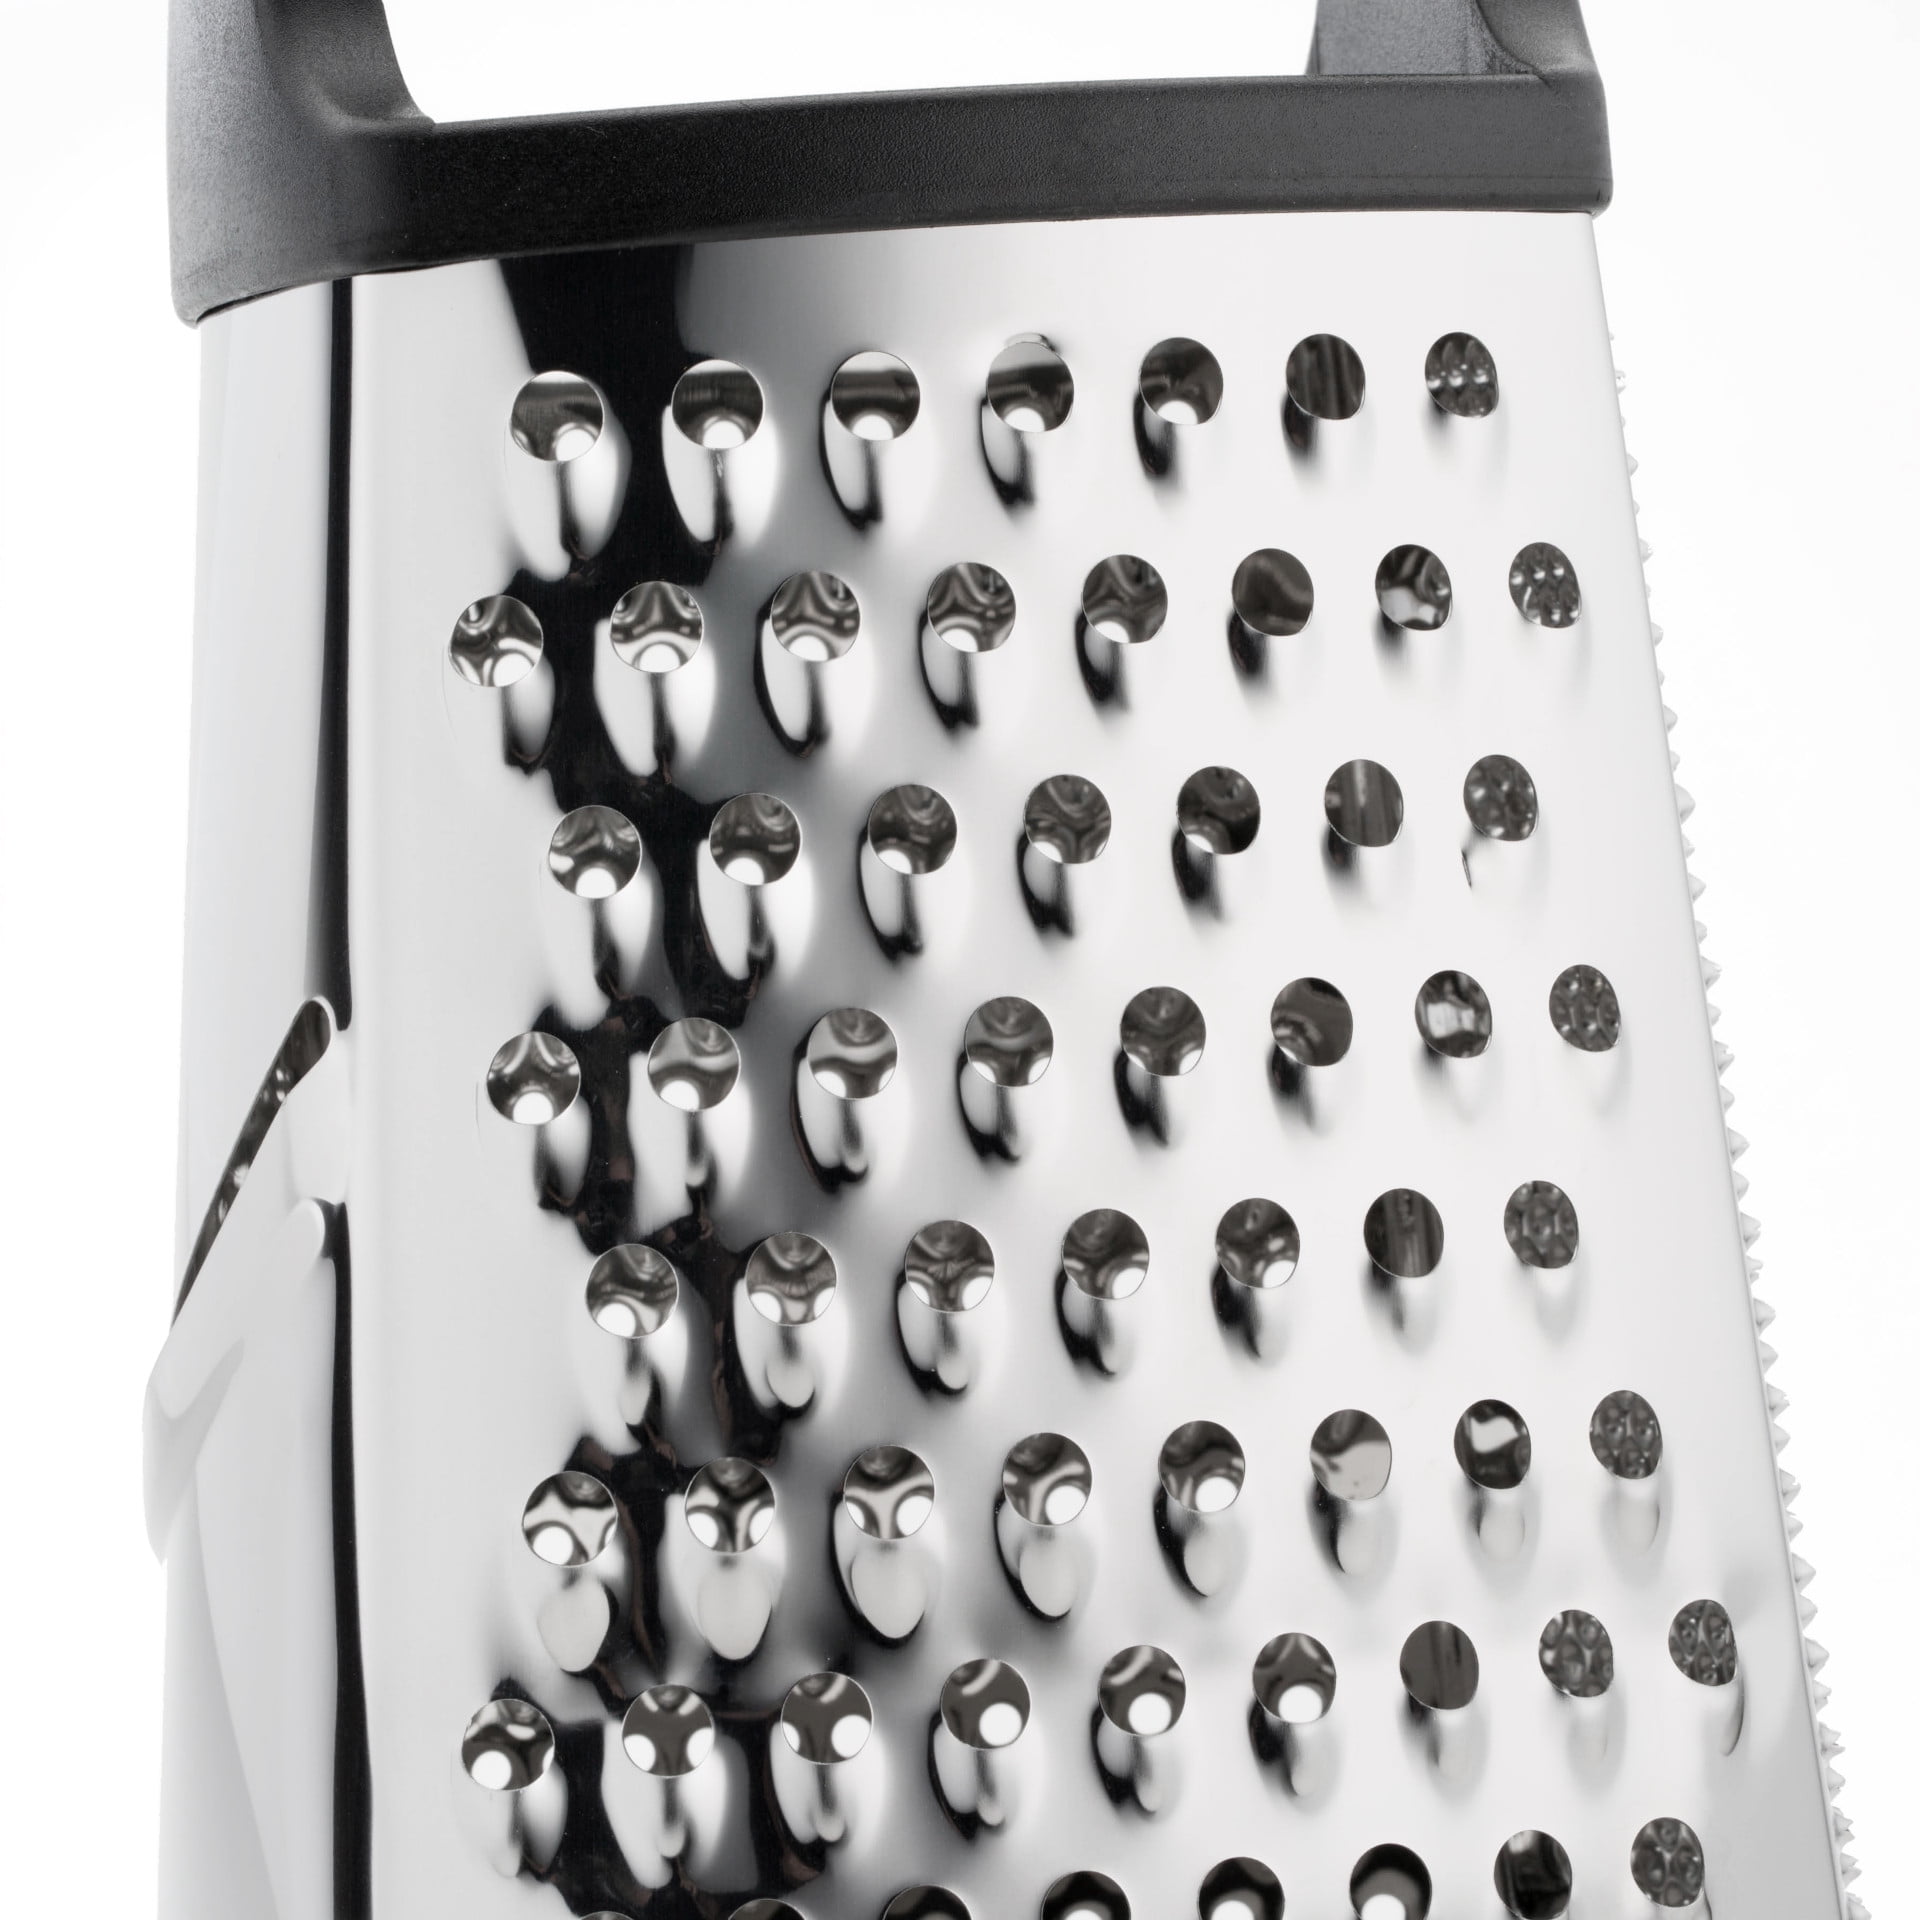 Box Grater For Kitchen,4-Sided Stainless Steel For Parmesan Cheese, Ginger,  Vegetables,XL Size and Easy to Use